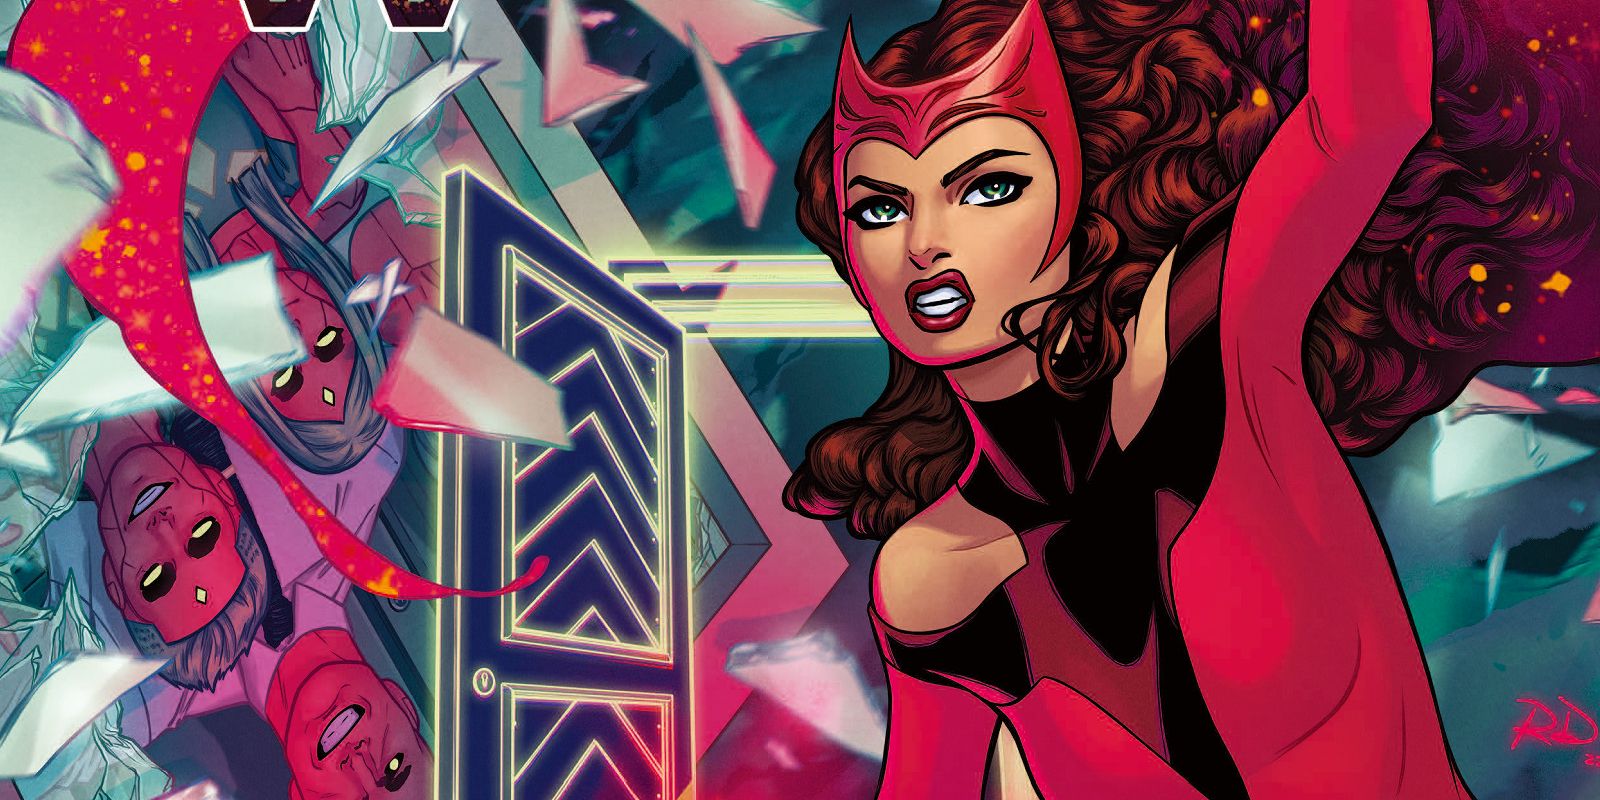 A blog dedicated to all your favorite moments — Scarlet Witch Annual #1  (2023) written by Steve